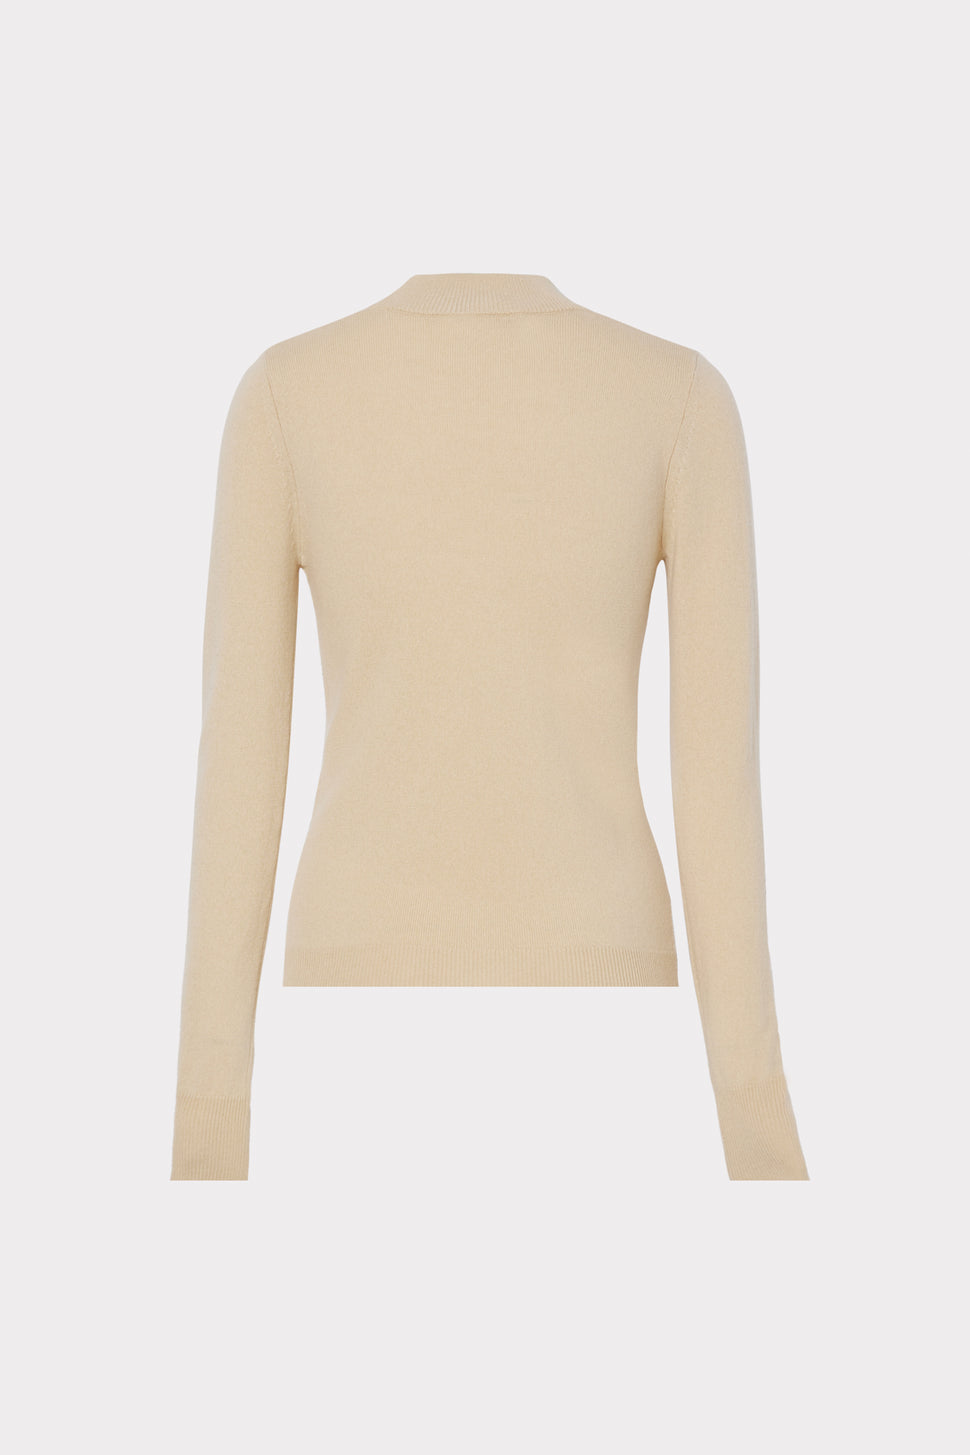 Front Cut Out Turtleneck in Caramel   MILLY